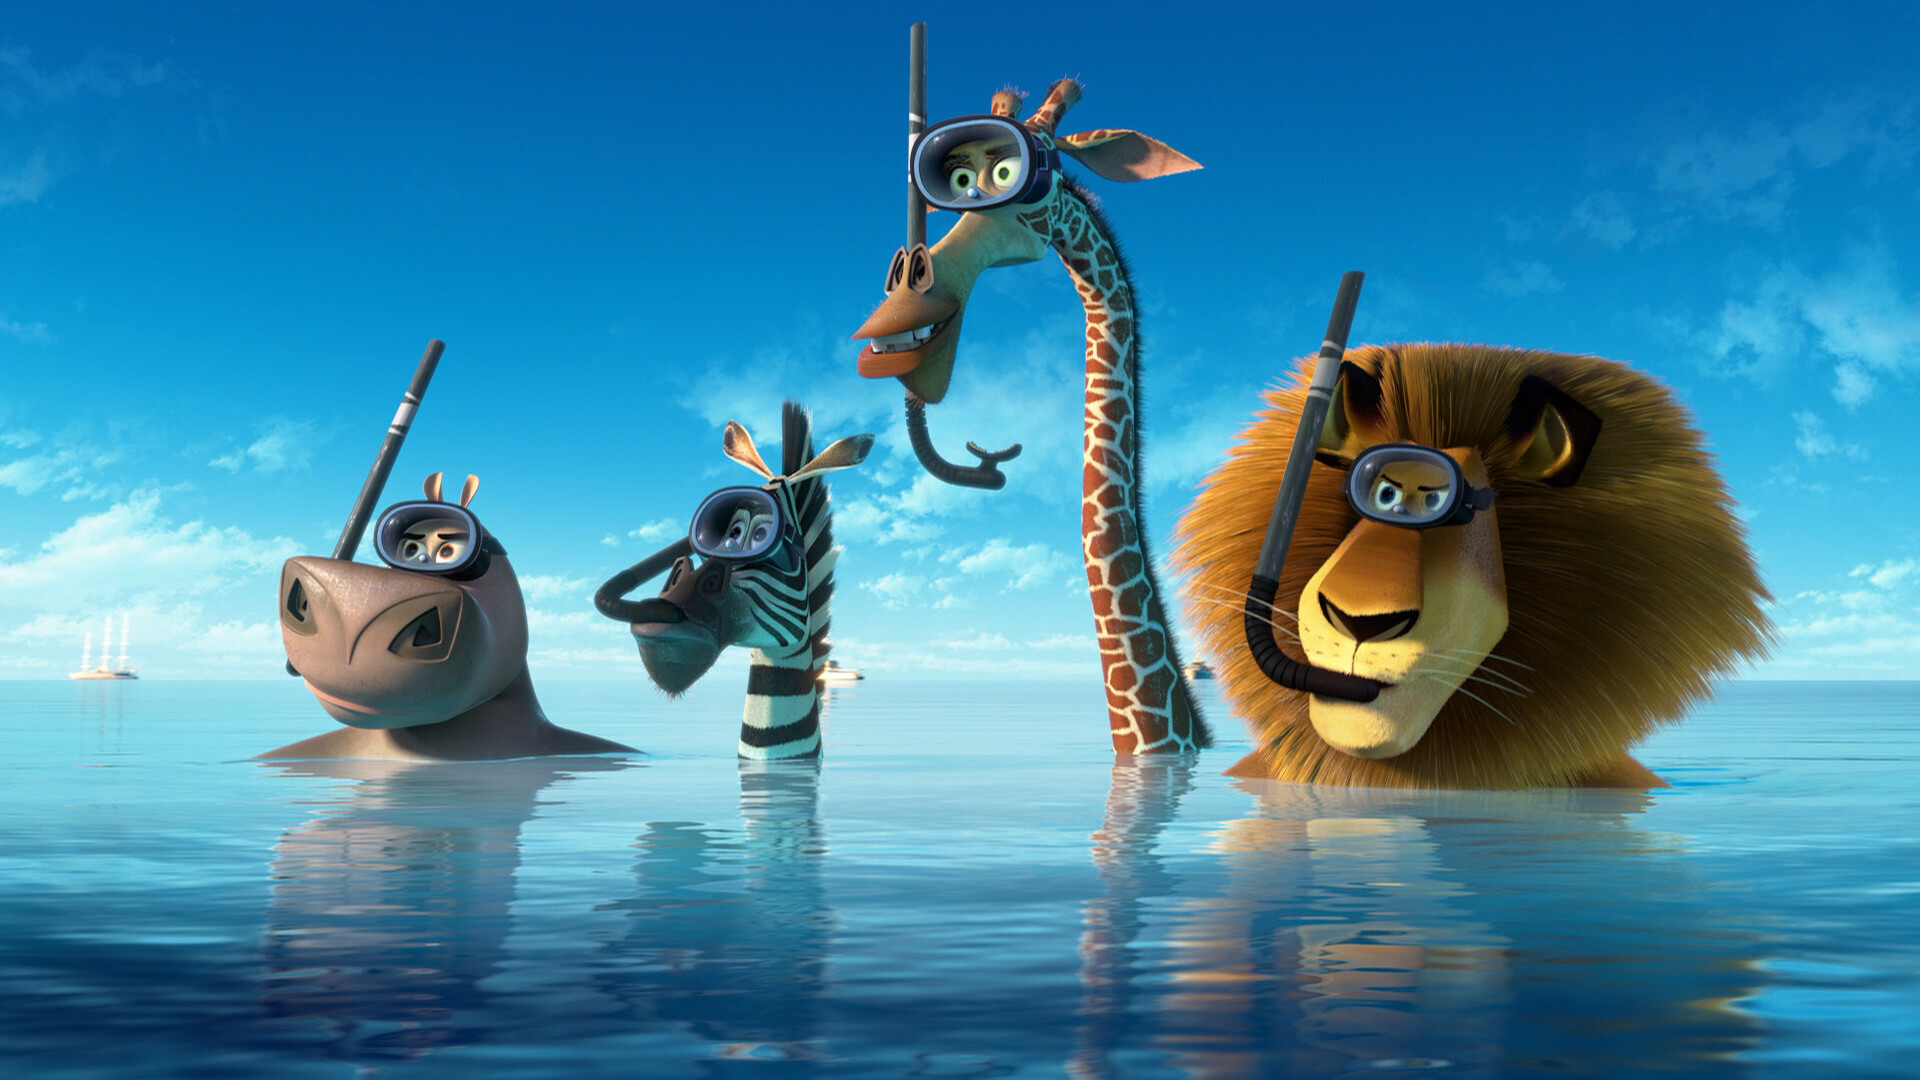 Madagascar (Movie): The story of four animals that escape from the Central Park Zoo in Manhattan. 1920x1080 Full HD Wallpaper.